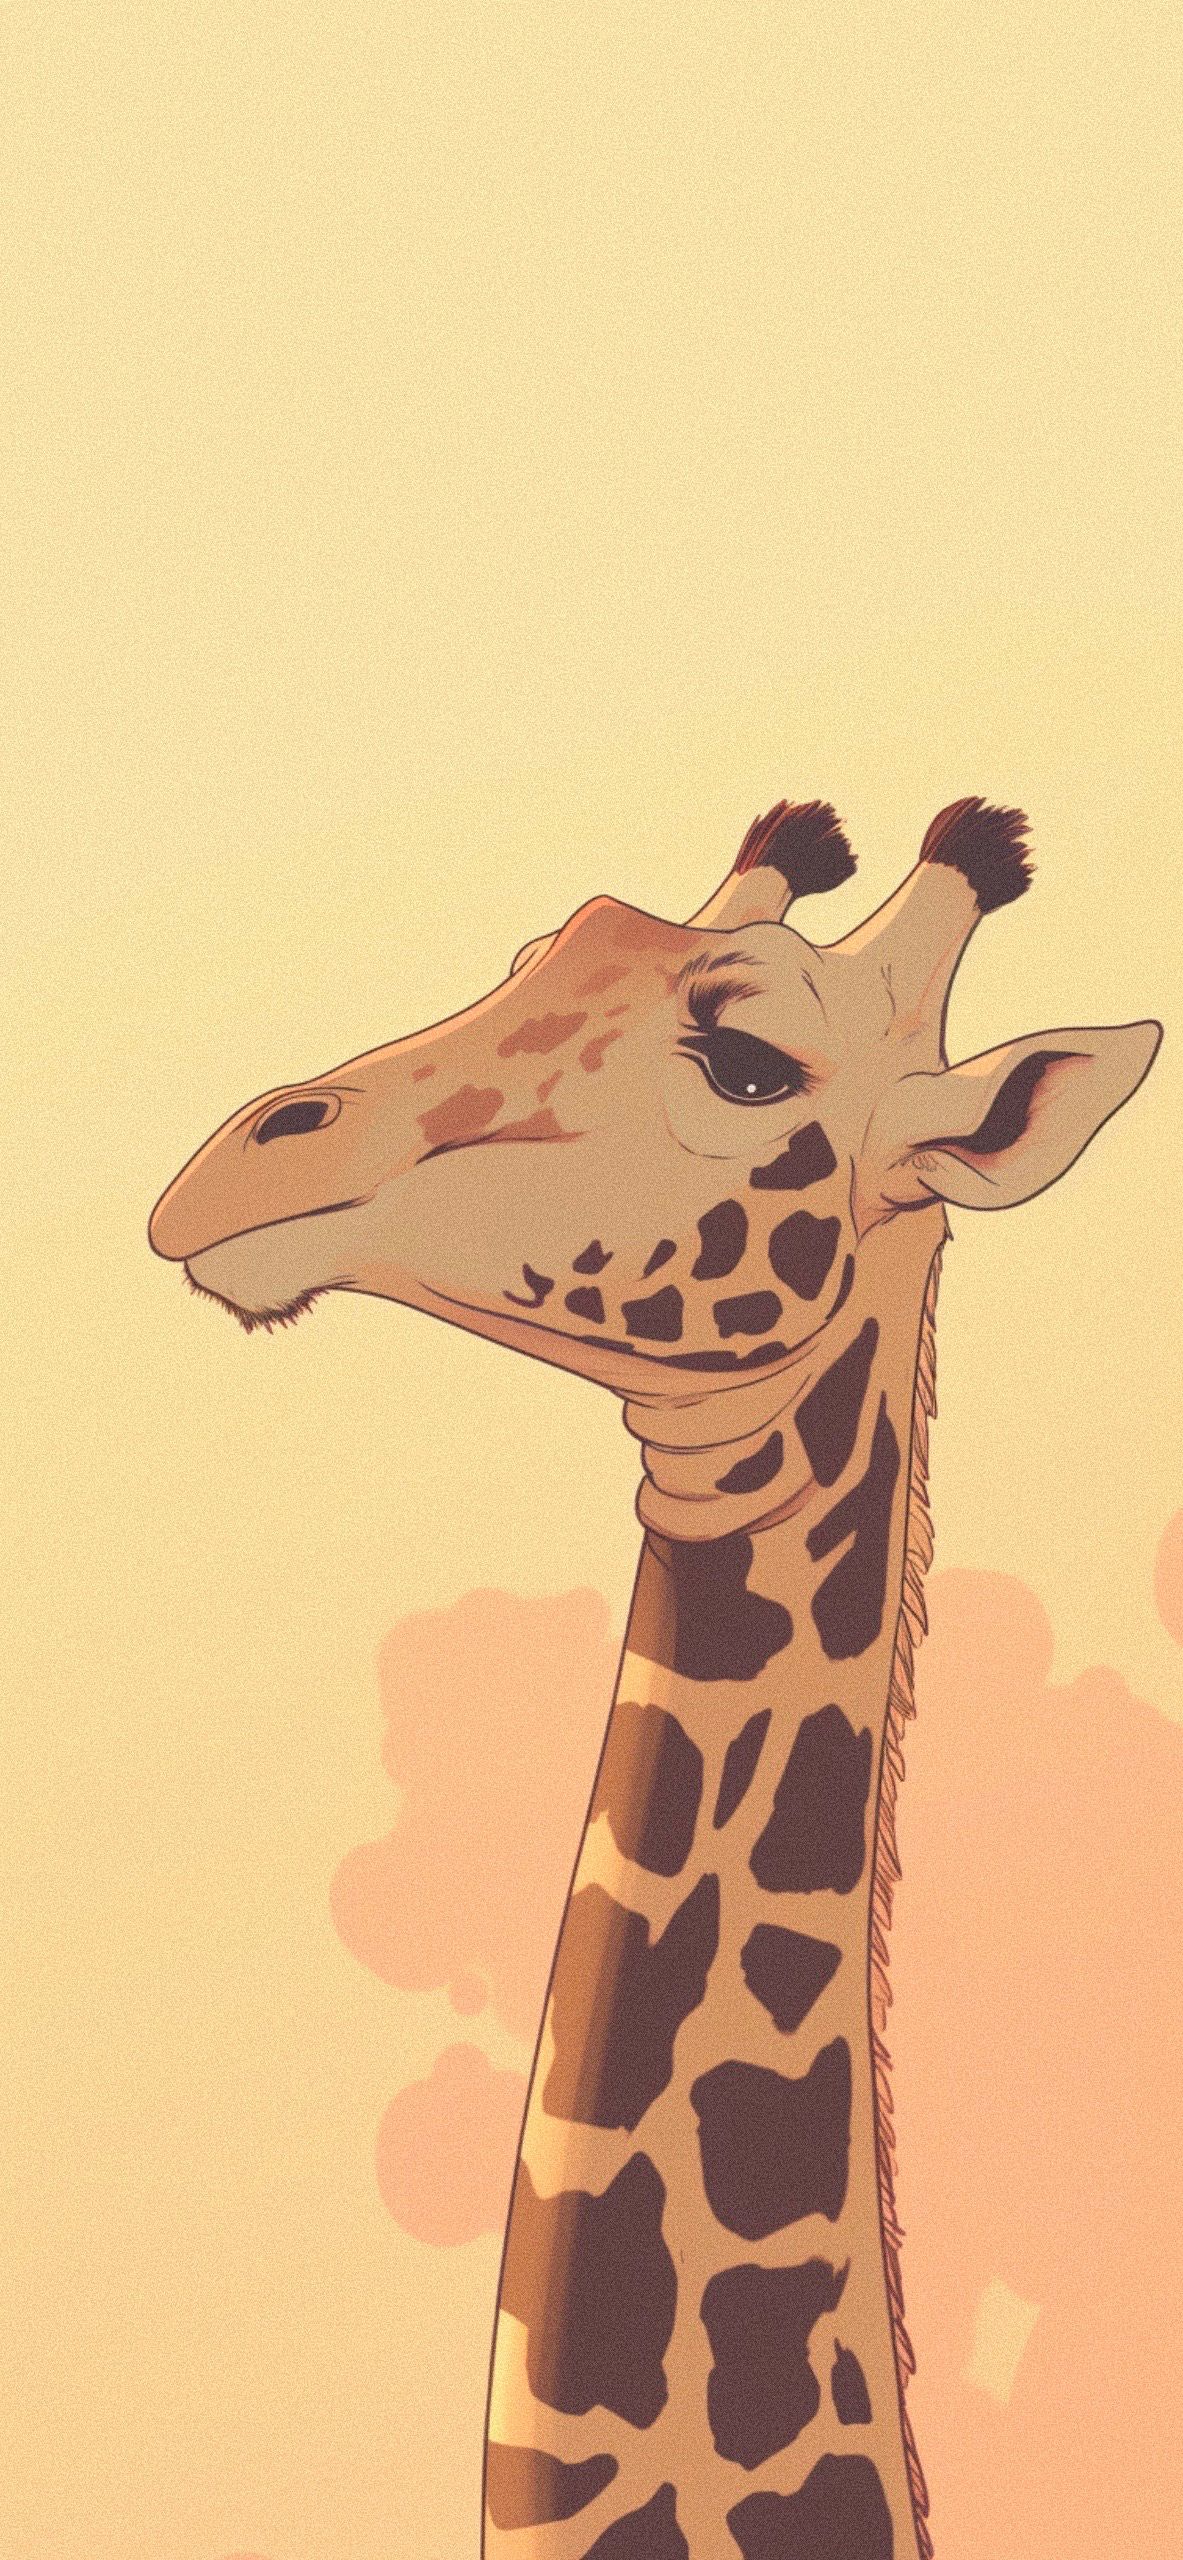 A giraffe is standing in front of trees - Light yellow, yellow iphone